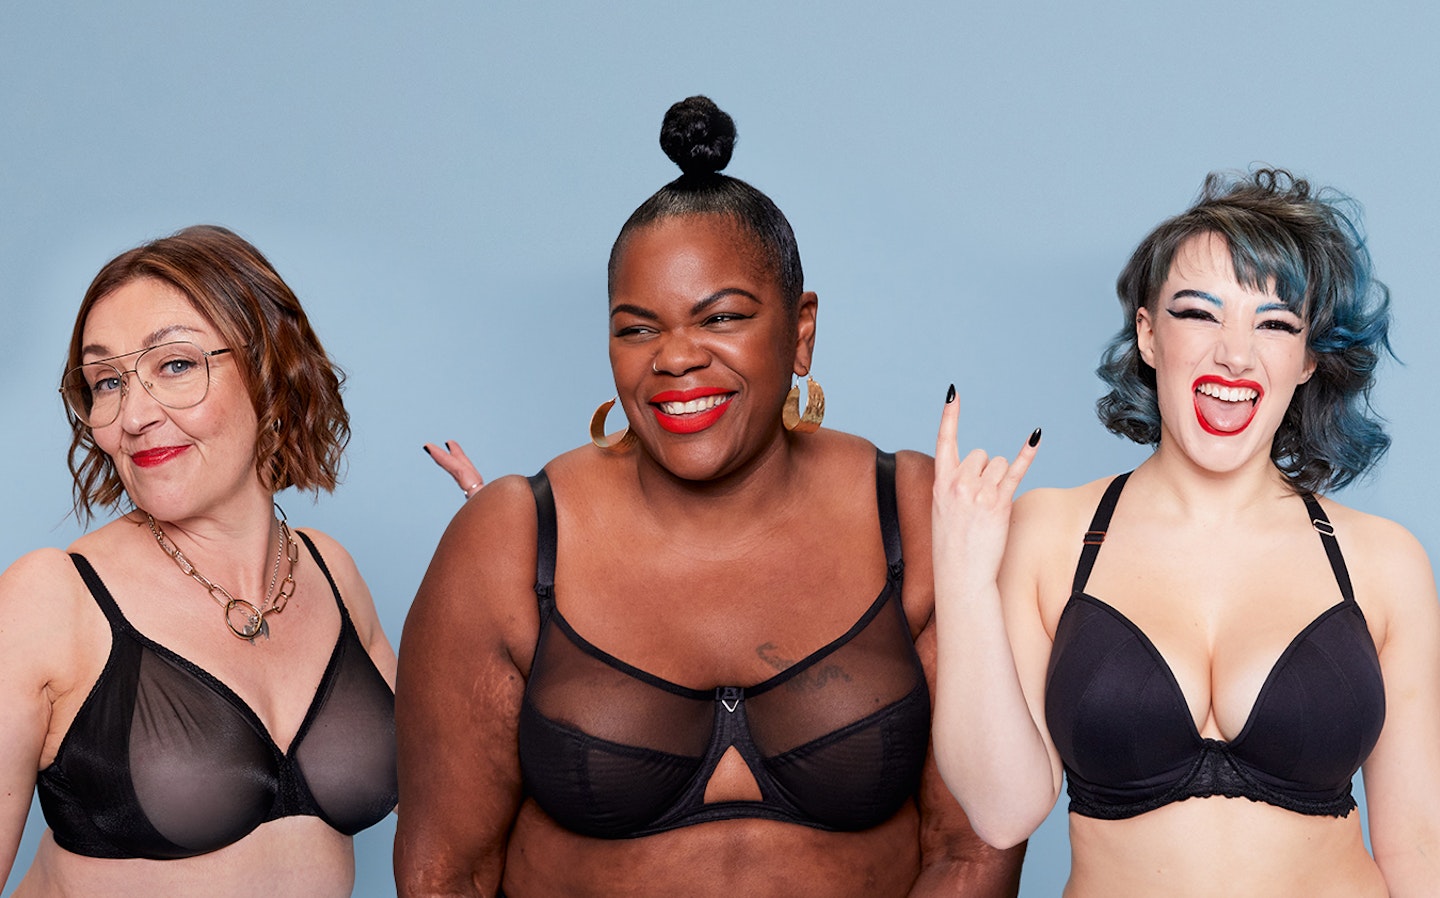 Are You Ready For Lingerie That'll Make You Feel Empowered?